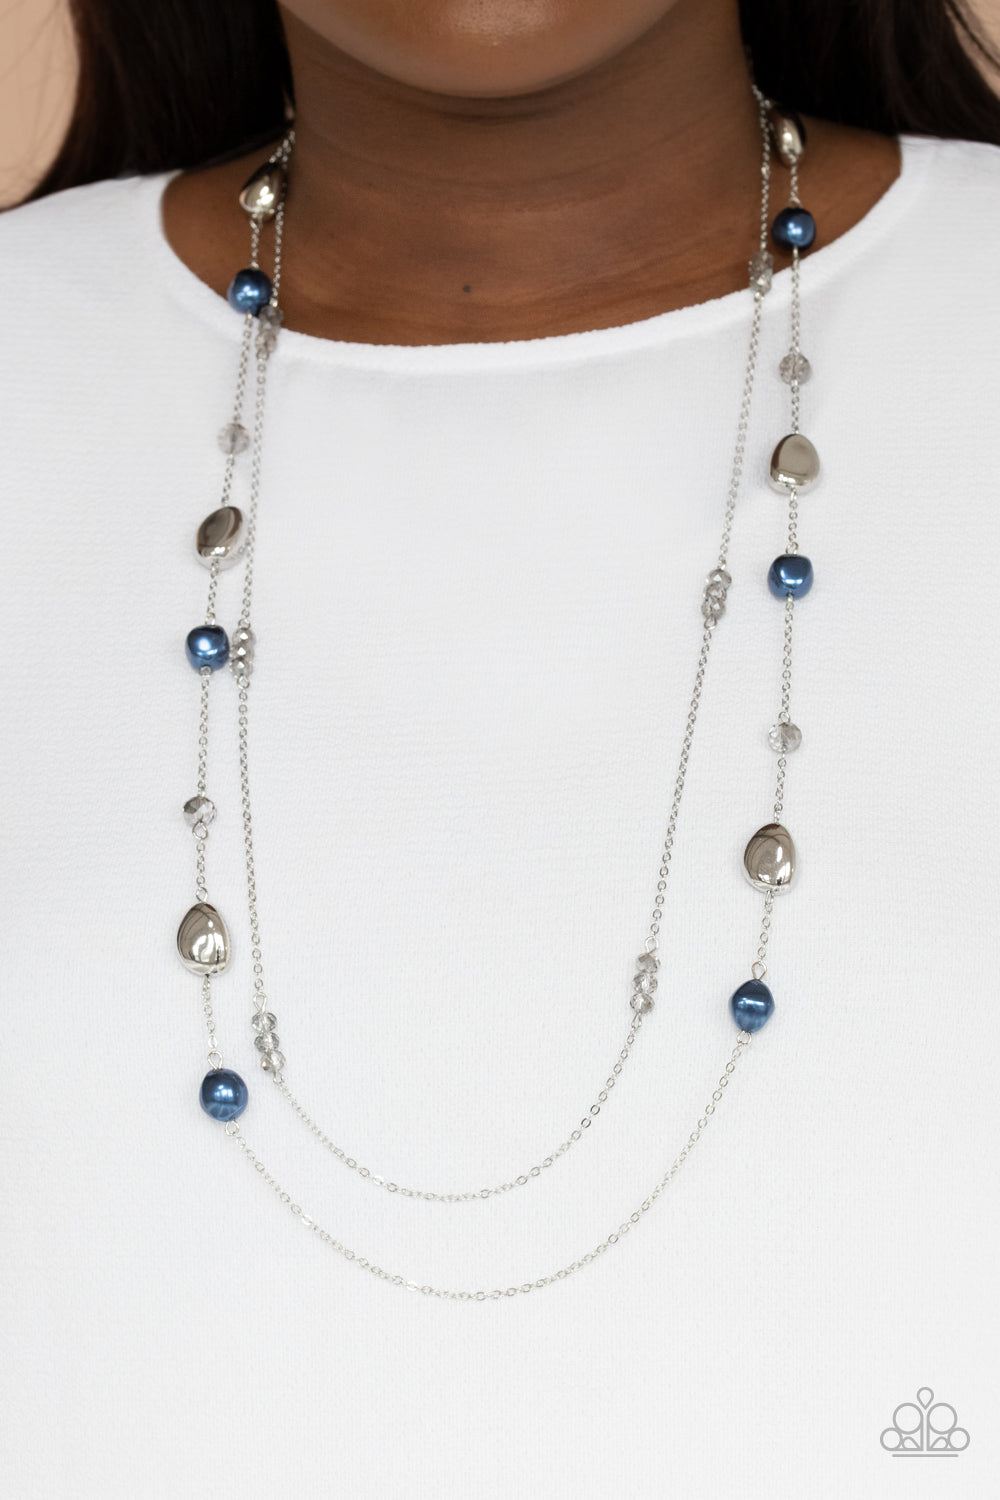 Gala Goals - Blue and Silver Necklace - Paparazzi Accessories - Dainty silver chain adorned in trios of hematite flecked crystal-like beads layers with a chain dotted with matching crystal-like accents and imperfect silver and pearly blue beads across the chest for a refined flair.